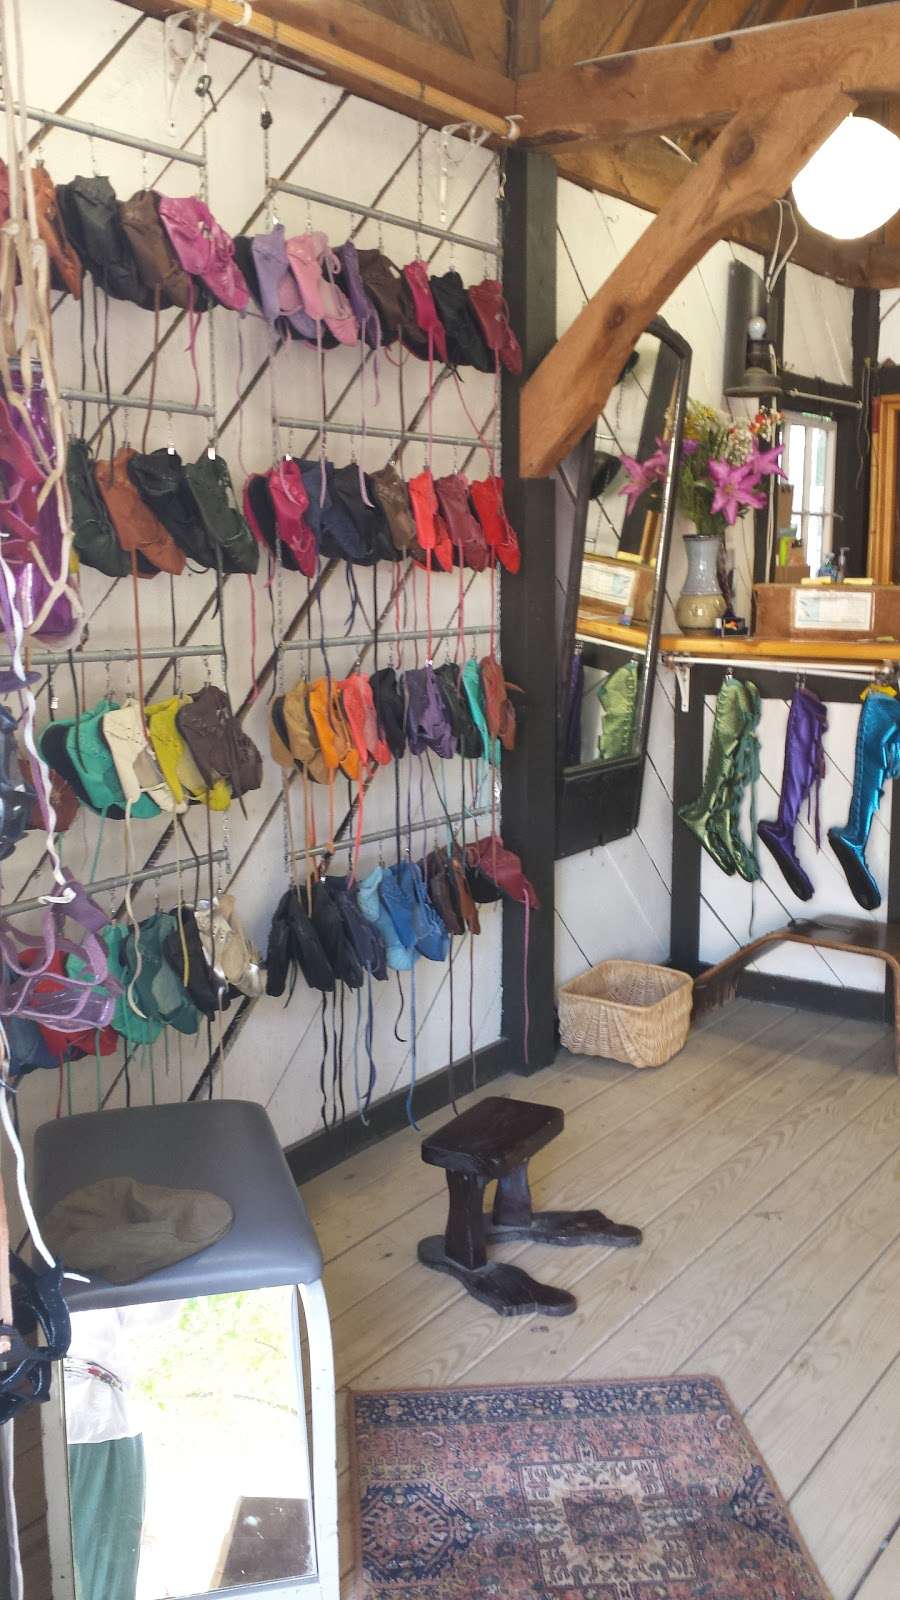 Medieval Moccasins | 1821 Crownsville Rd, Annapolis, MD 21401, USA